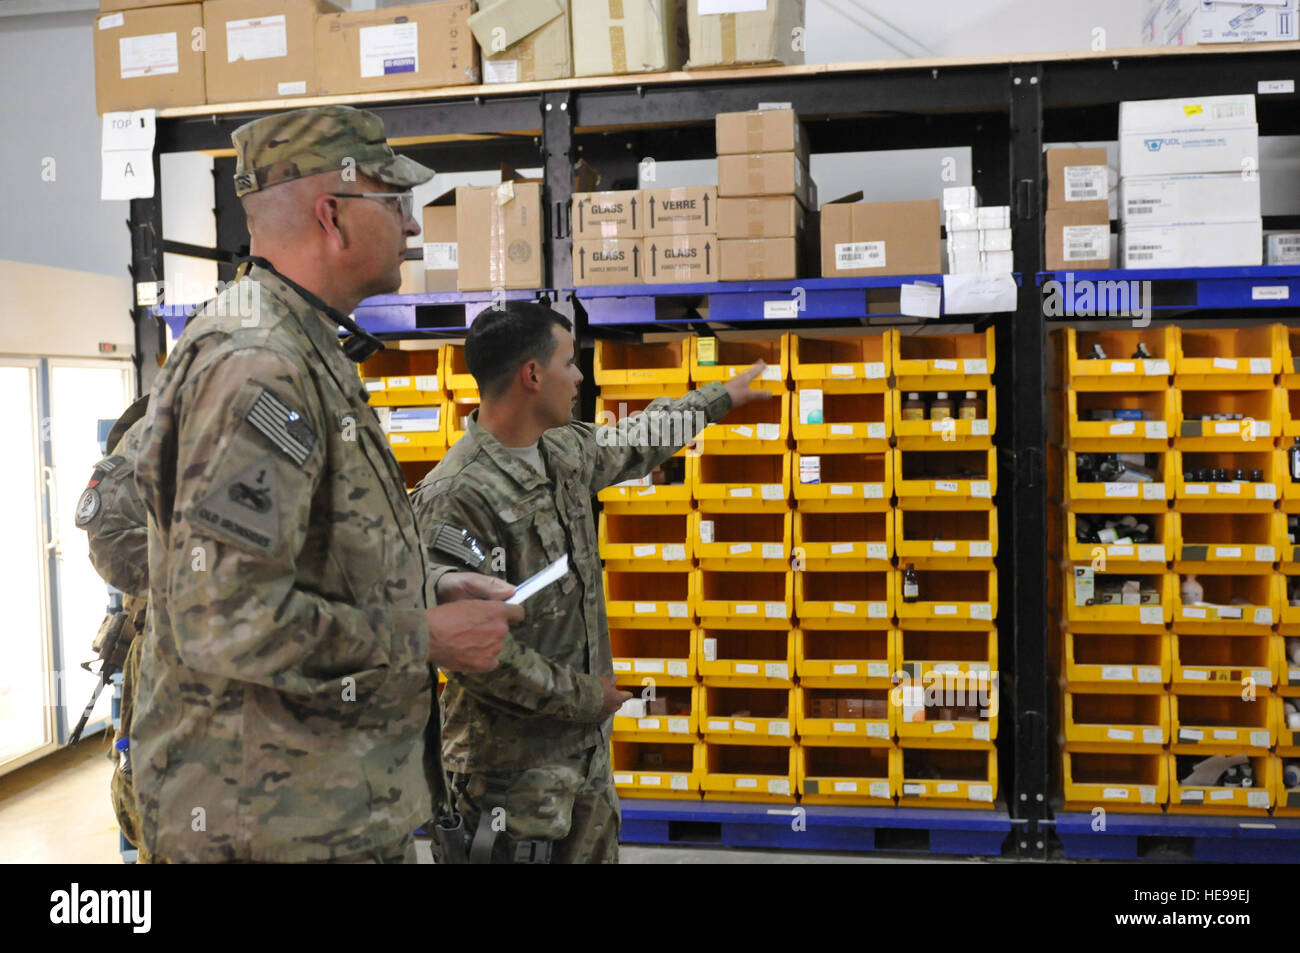 U.S. Air Force Senior Airman Jake Smith, right, the lead medical logistics advisor to the 2nd Forward Support Depot, gives a tour of a medical supply warehouse to U.S. Army Brig. Gen. Clark LeMasters, Jr., NATO Training Mission - Afghanistan's Deputy Commander of Supporting Operations commander, during a site visit at the Kandahar Regional Military Hospital in southern Afghanistan, May 28, 2012. LeMasters traveled from Kabul to assess logistics support for Afghan National Security Forces in southern Afghanistan. Stock Photo